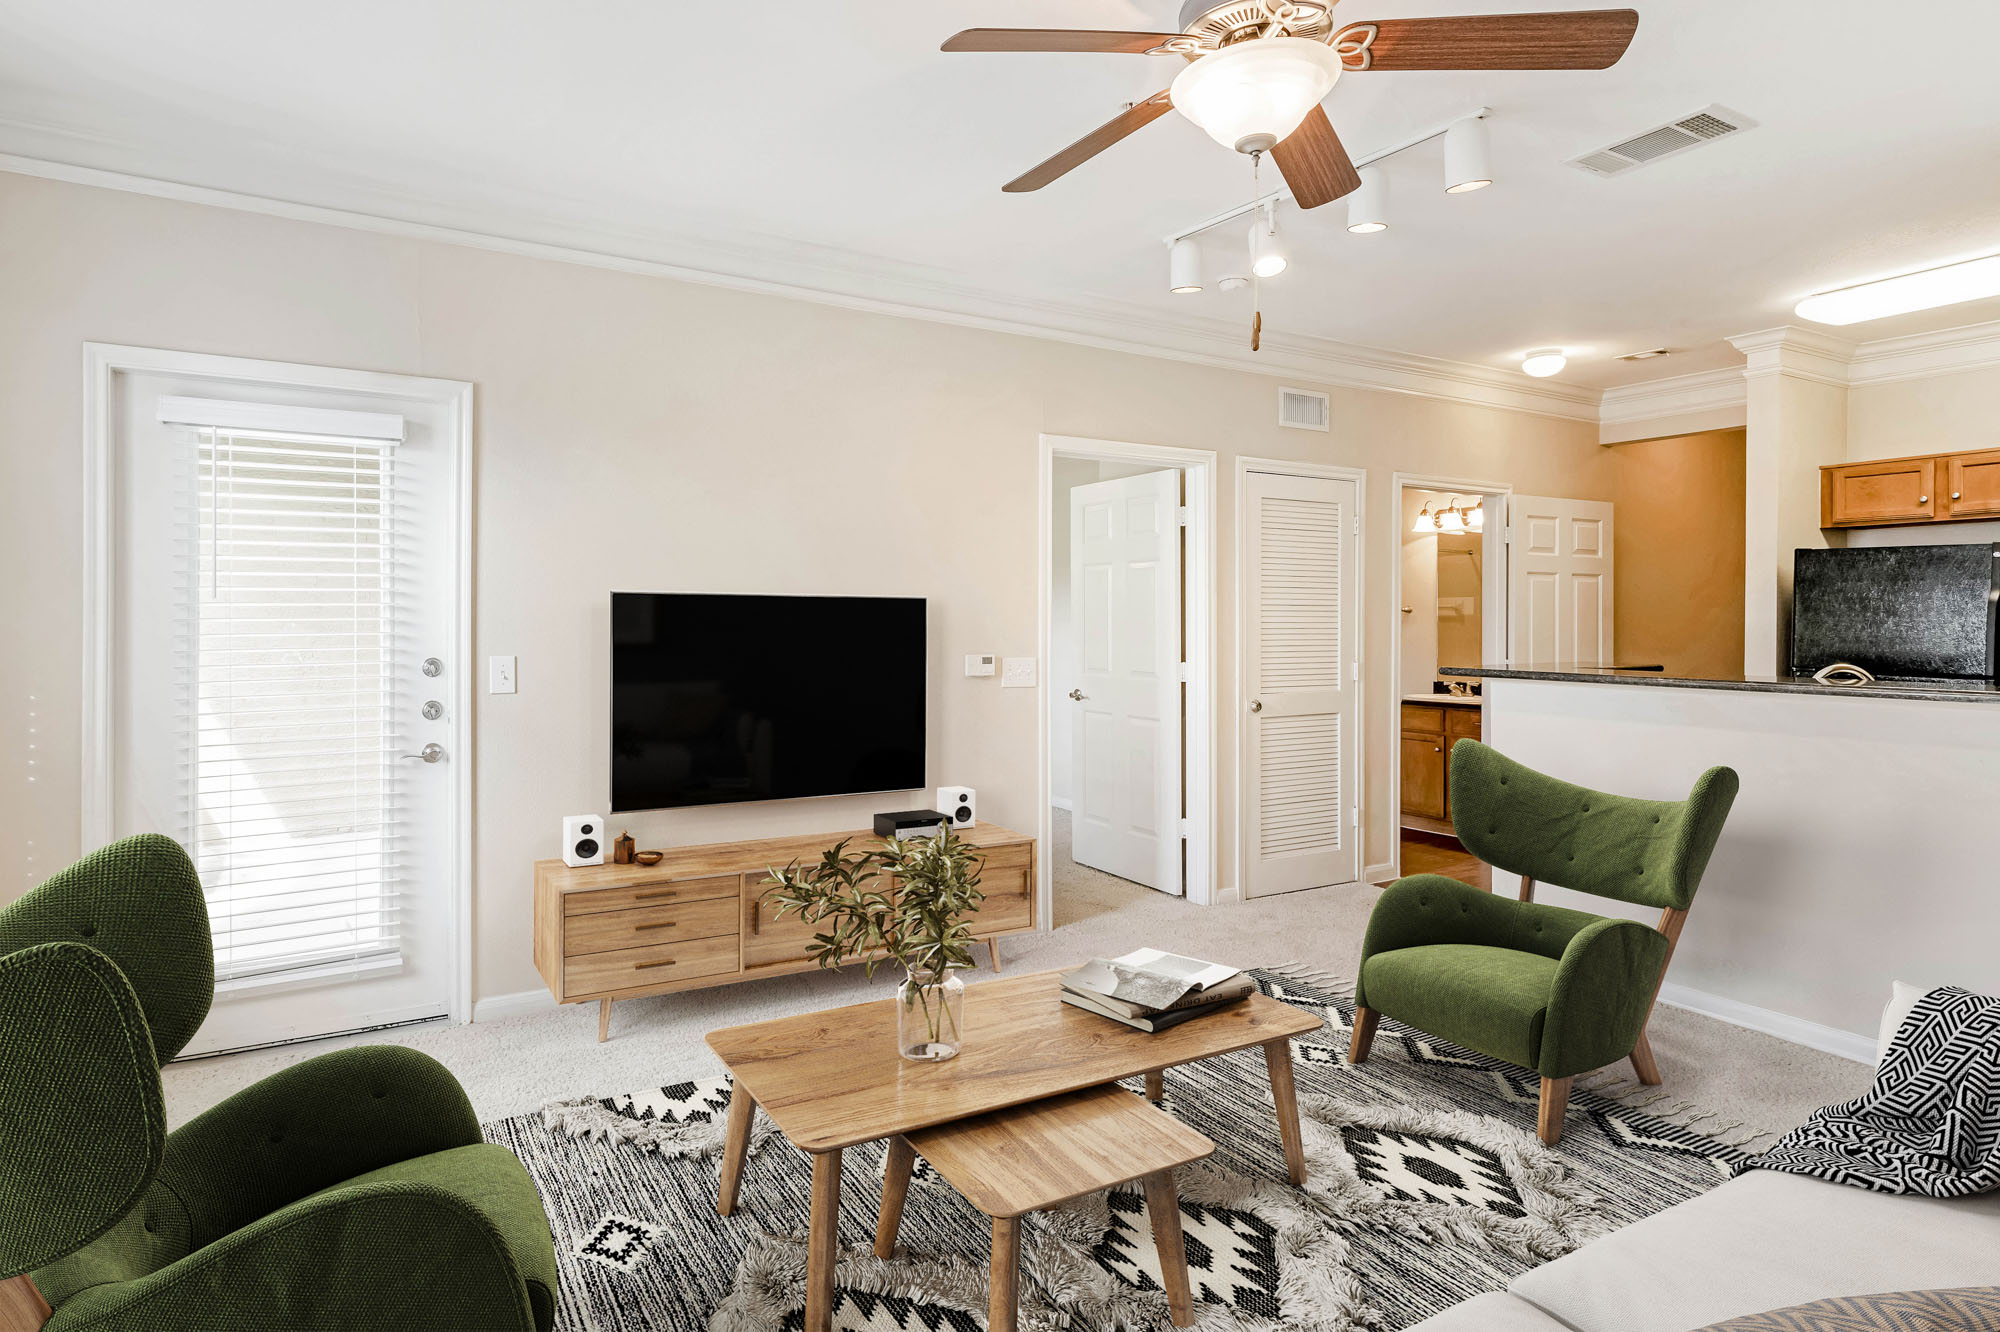 A living space at The Villas at Shadow Creek apartments in Houston, TX.